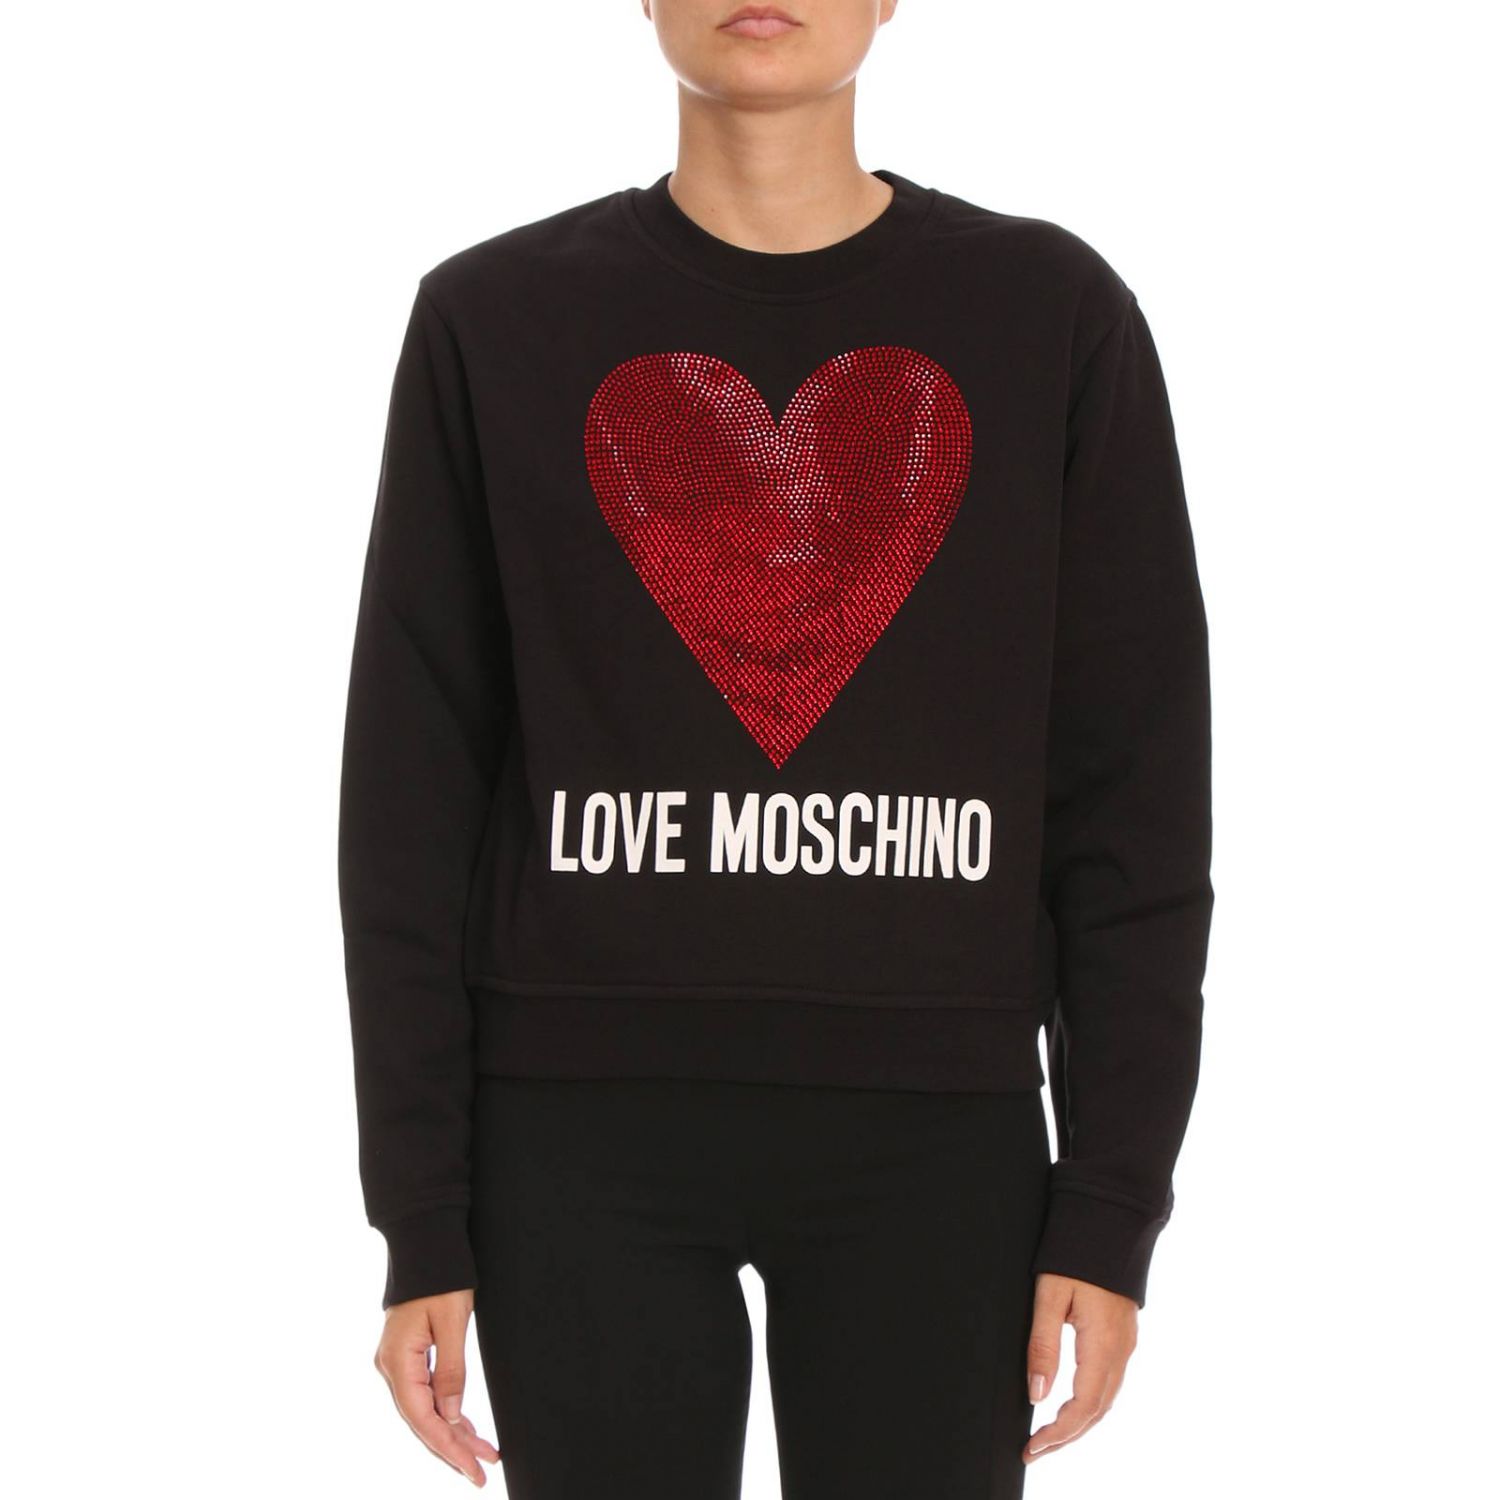 moschino jumpers ladies